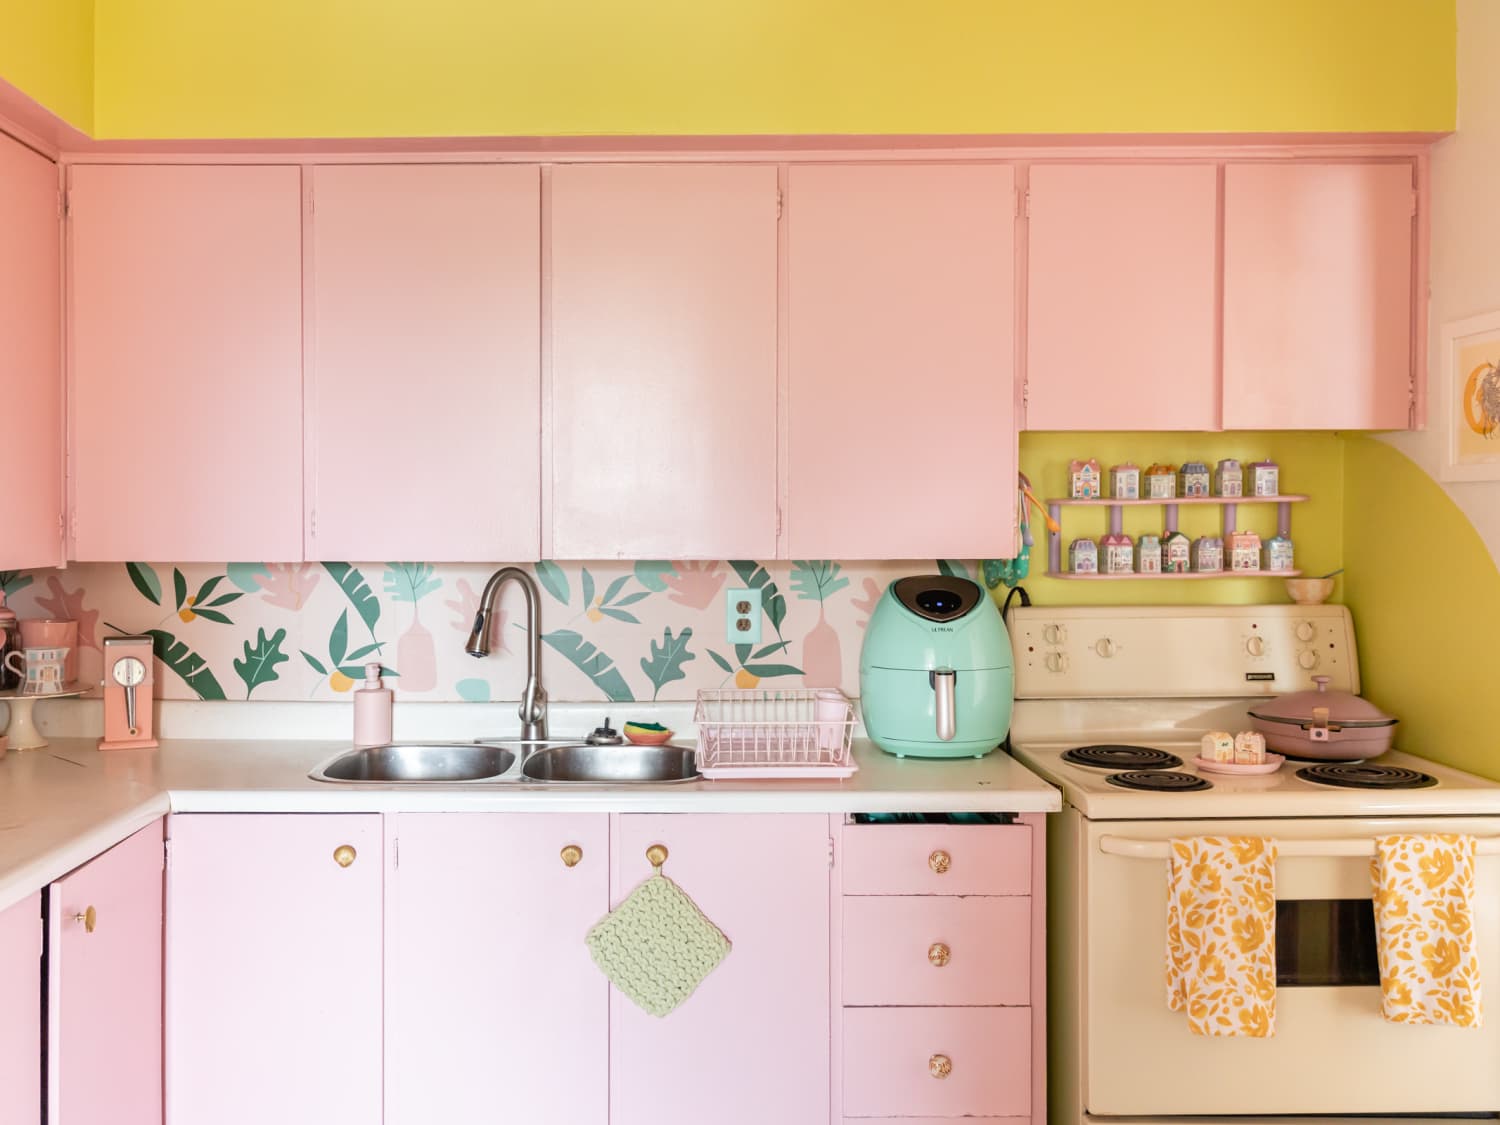 Kitchen Accessories Shopping Guide: Blush Pink! by Albie Knows Interior  Design + Content Creation